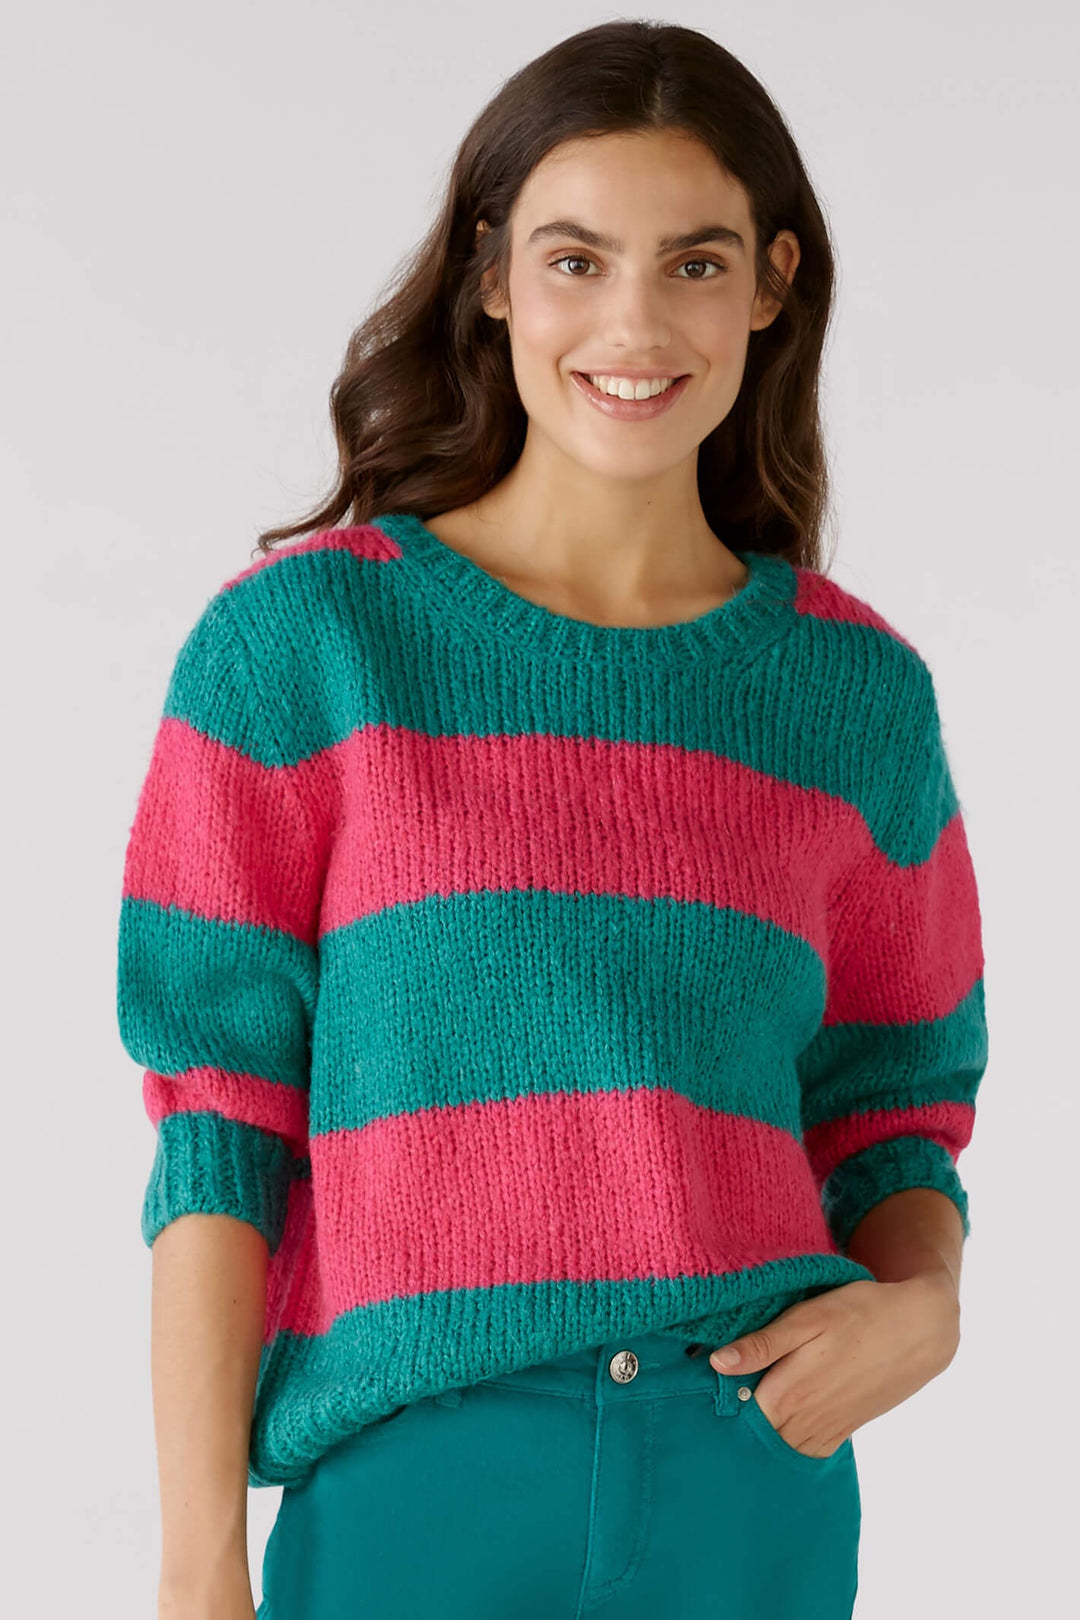 Oui 79633 Green Pink Striped Jumper - Dotique Chesterfield